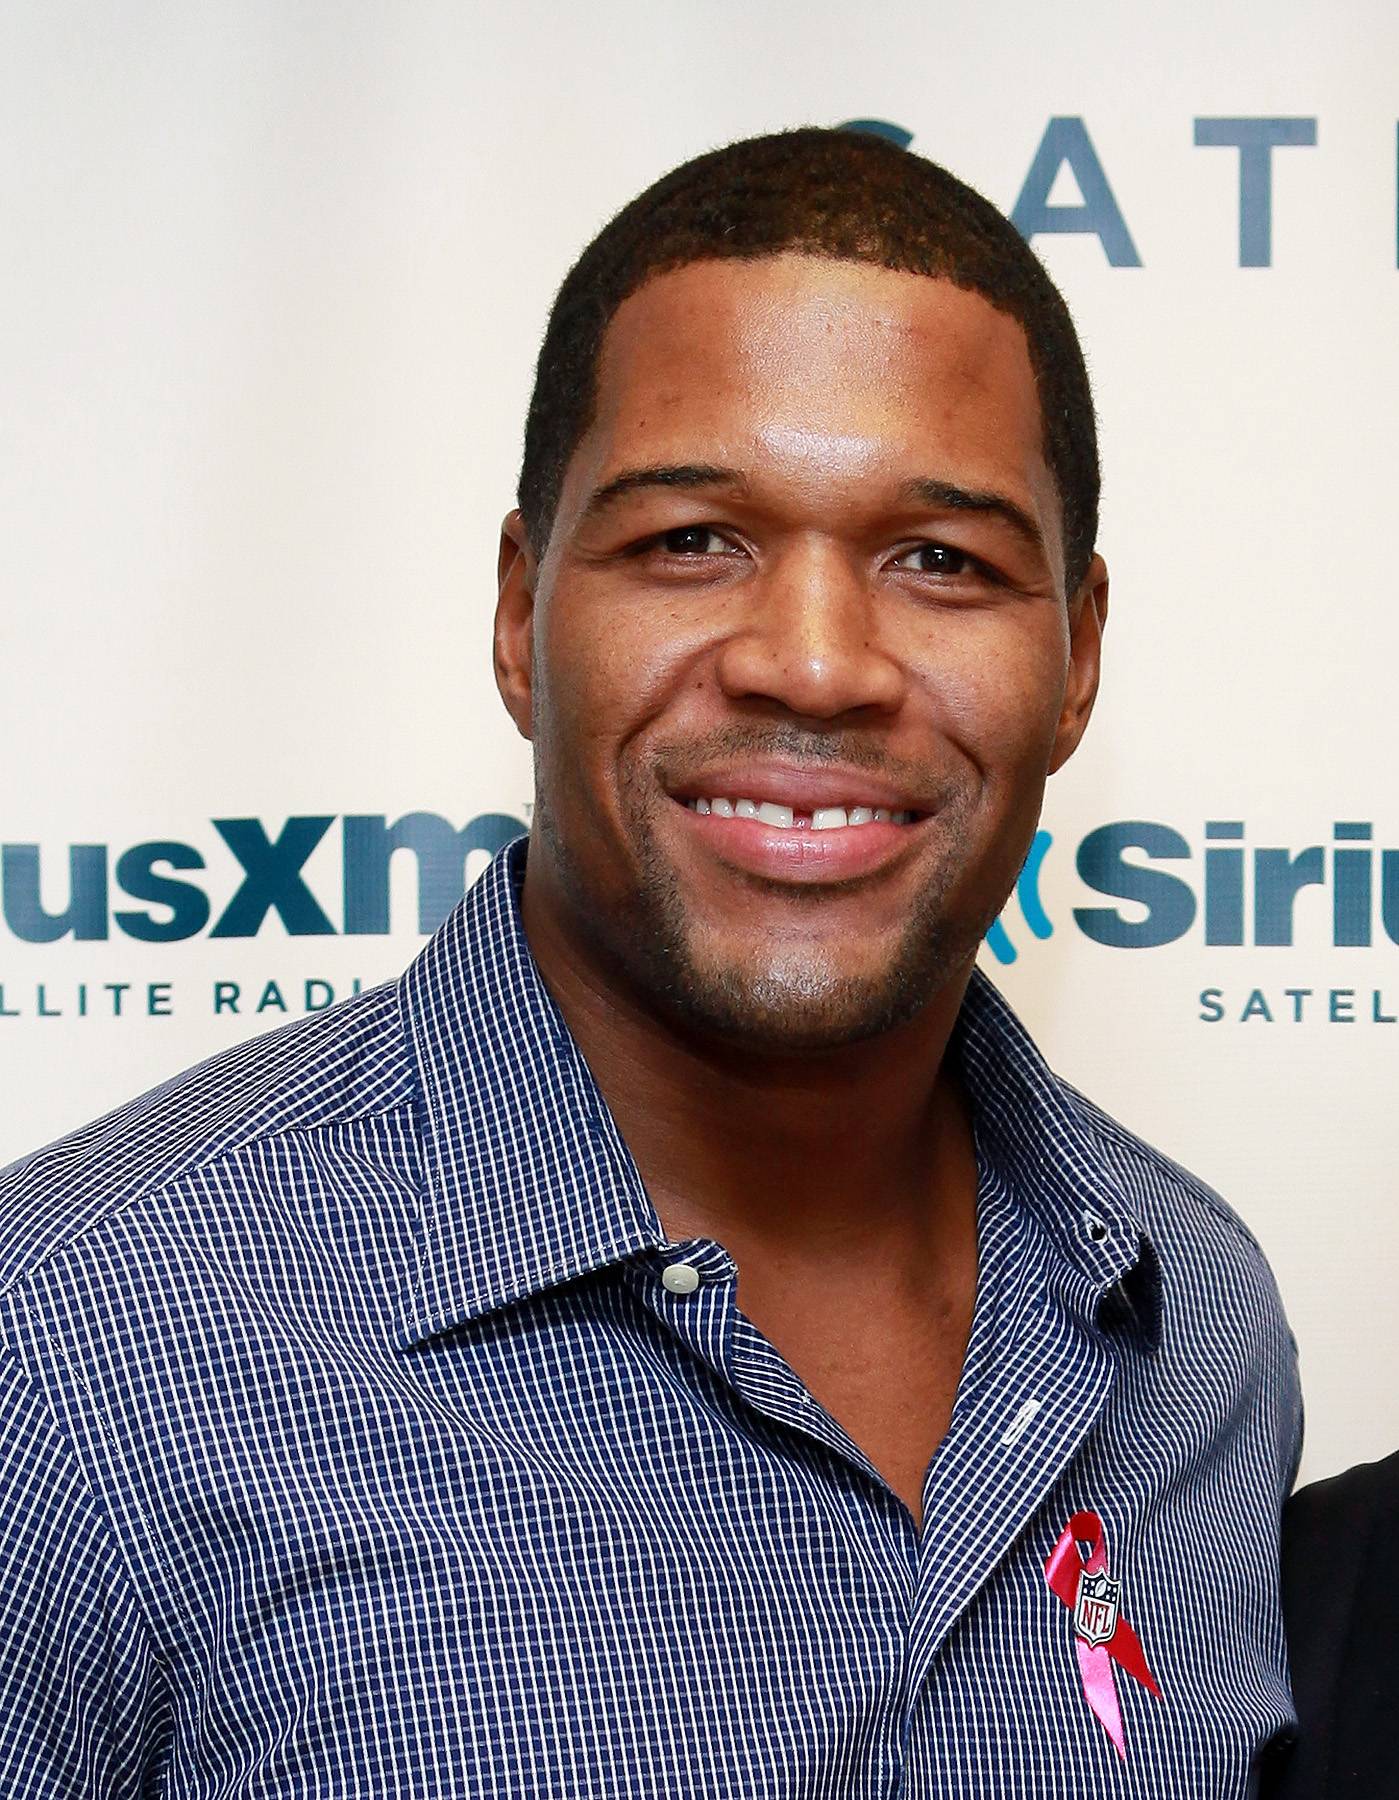 Michael Strahan to Receive Texas Southern’s Highest Honor